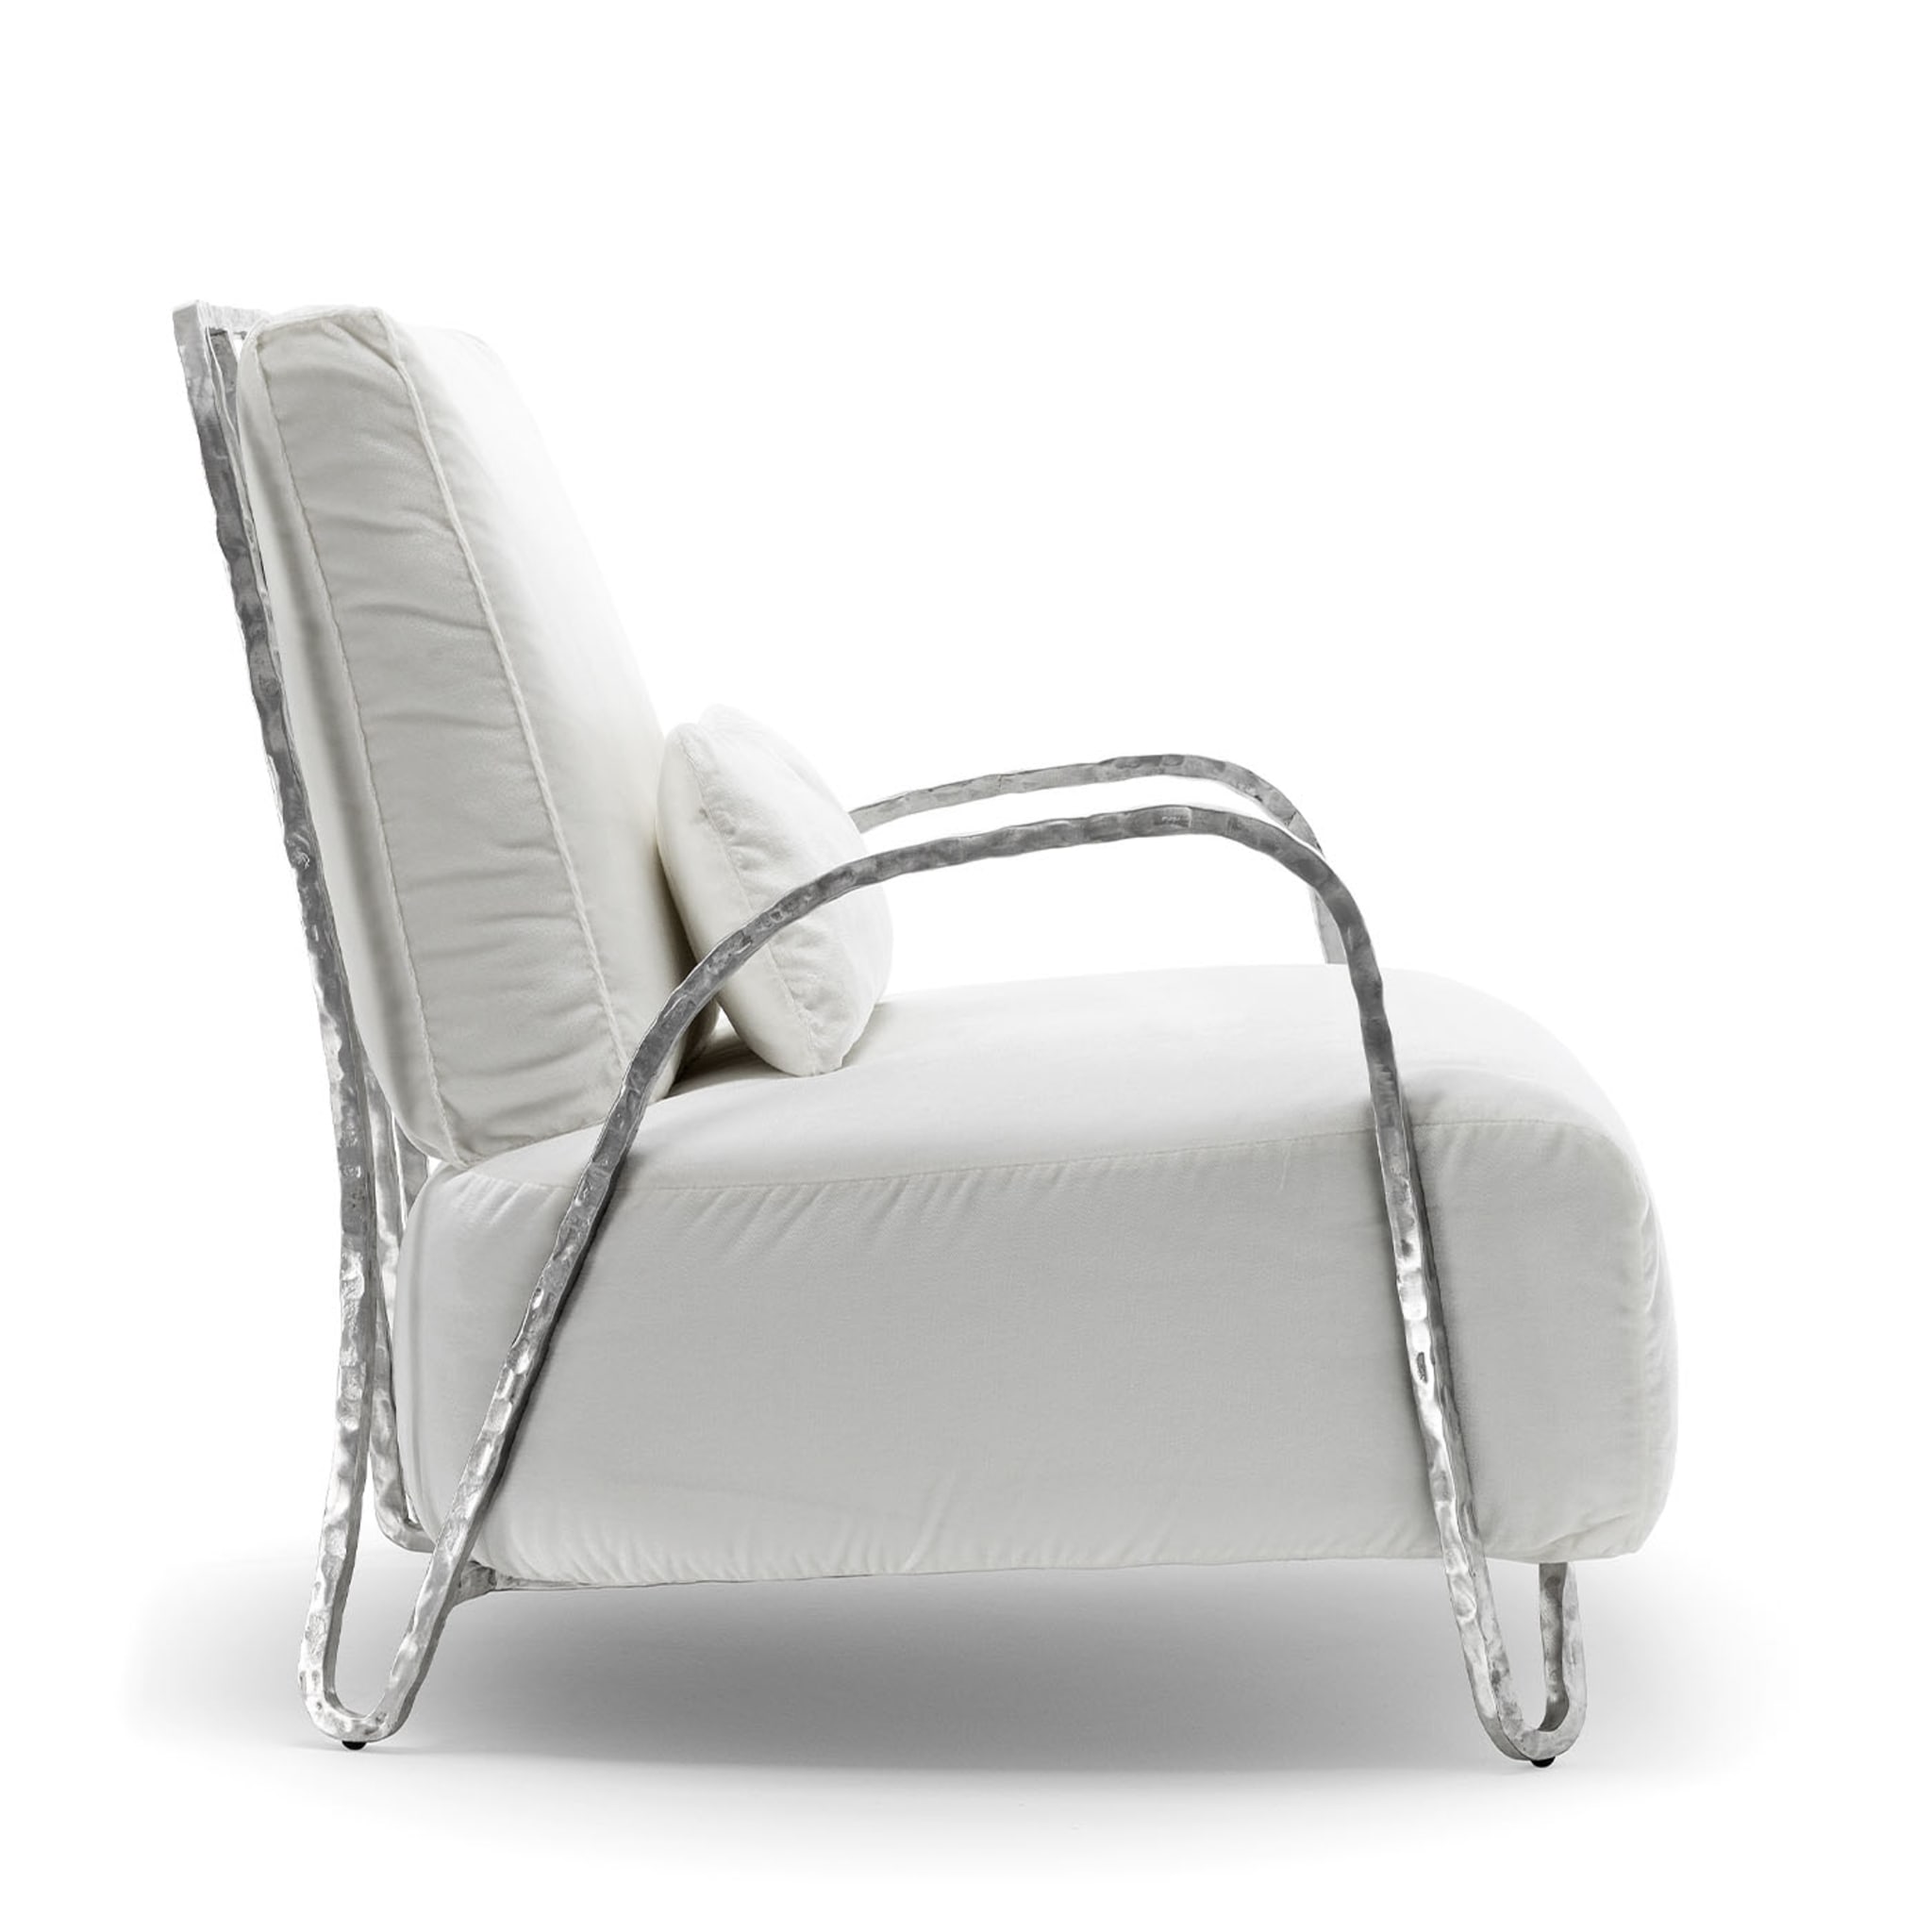 Moonlight White and Silver High Armchair - Alternative view 1